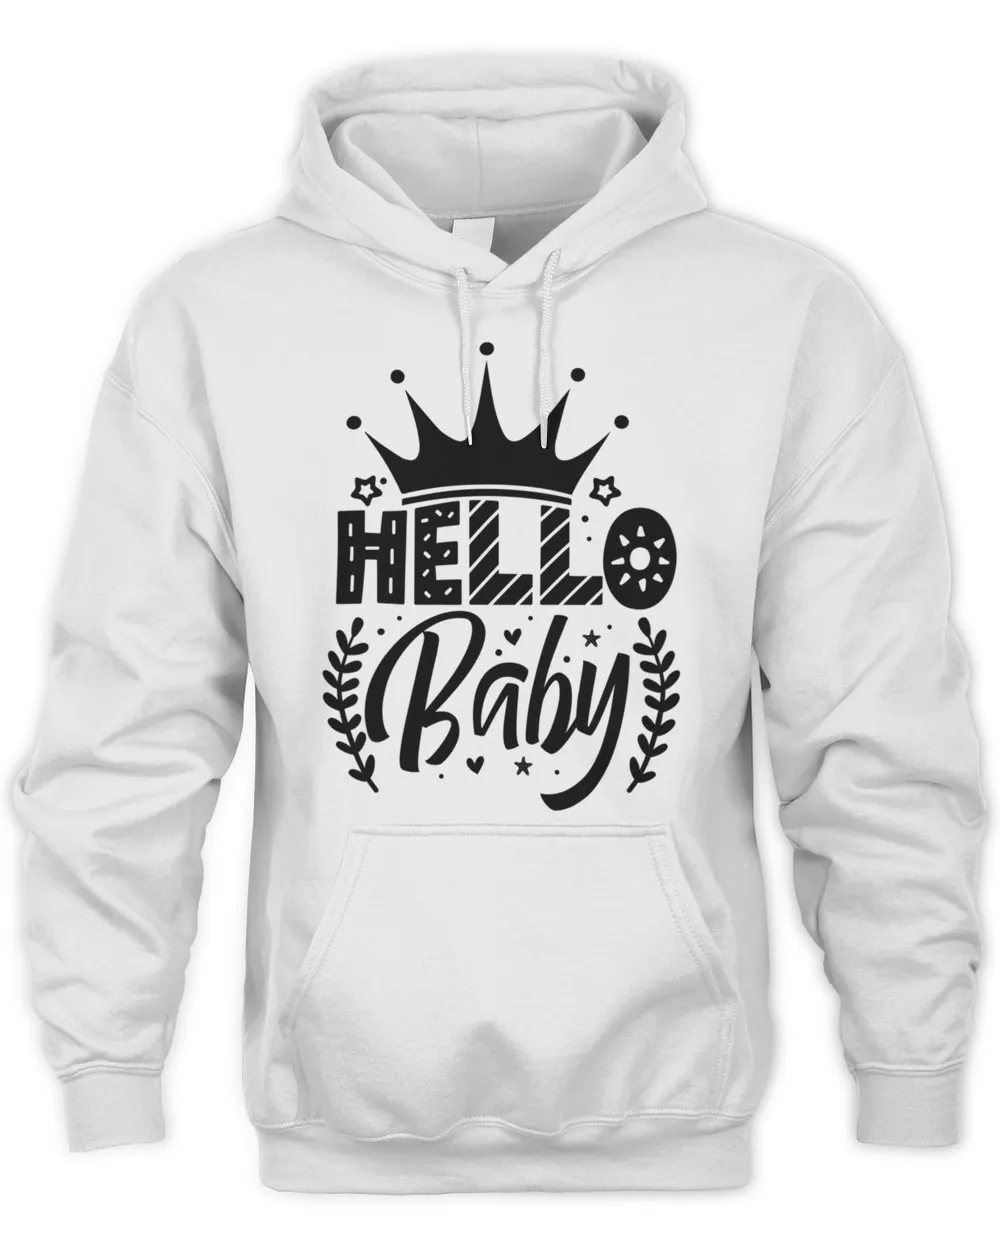 HELLO BABY Graphic design for New Coming Babys61 T-Shirt